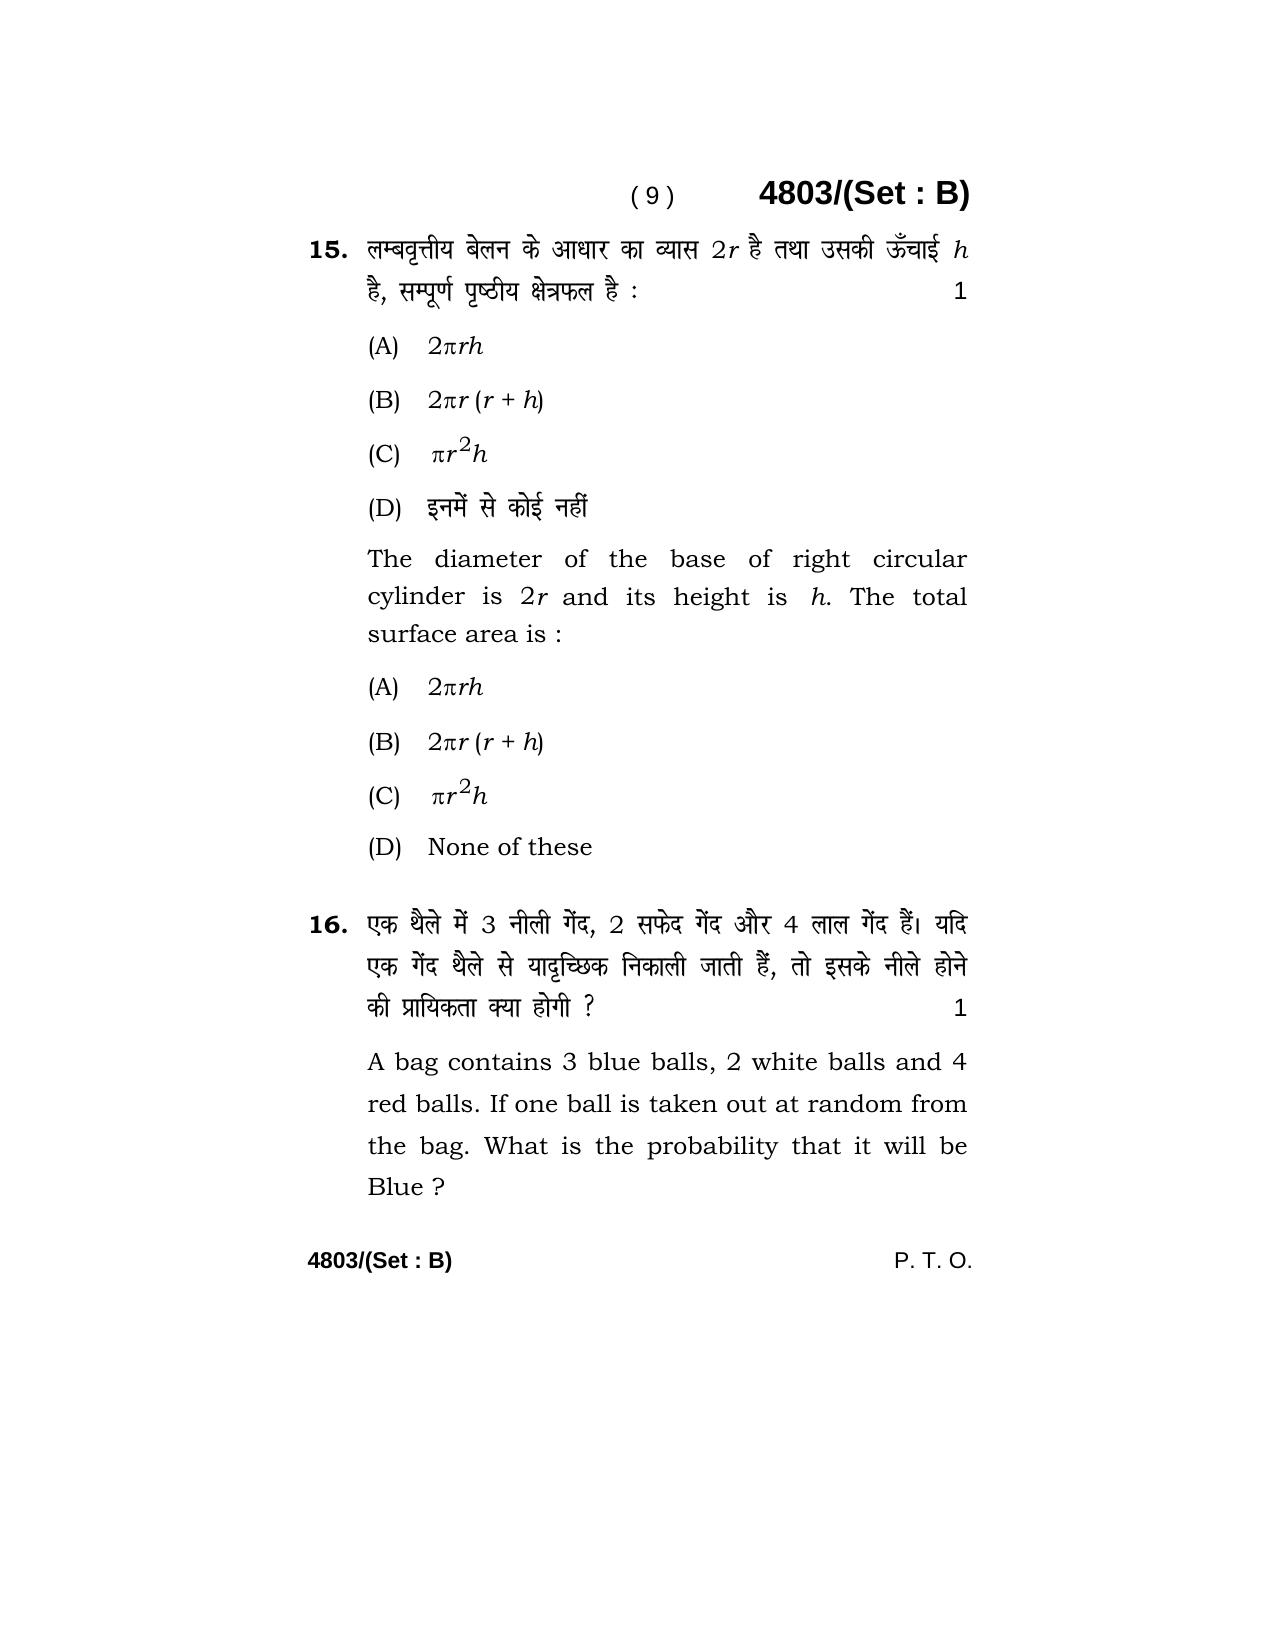 Haryana Board HBSE Class 10 Mathematics 2020 Question Paper - Page 25